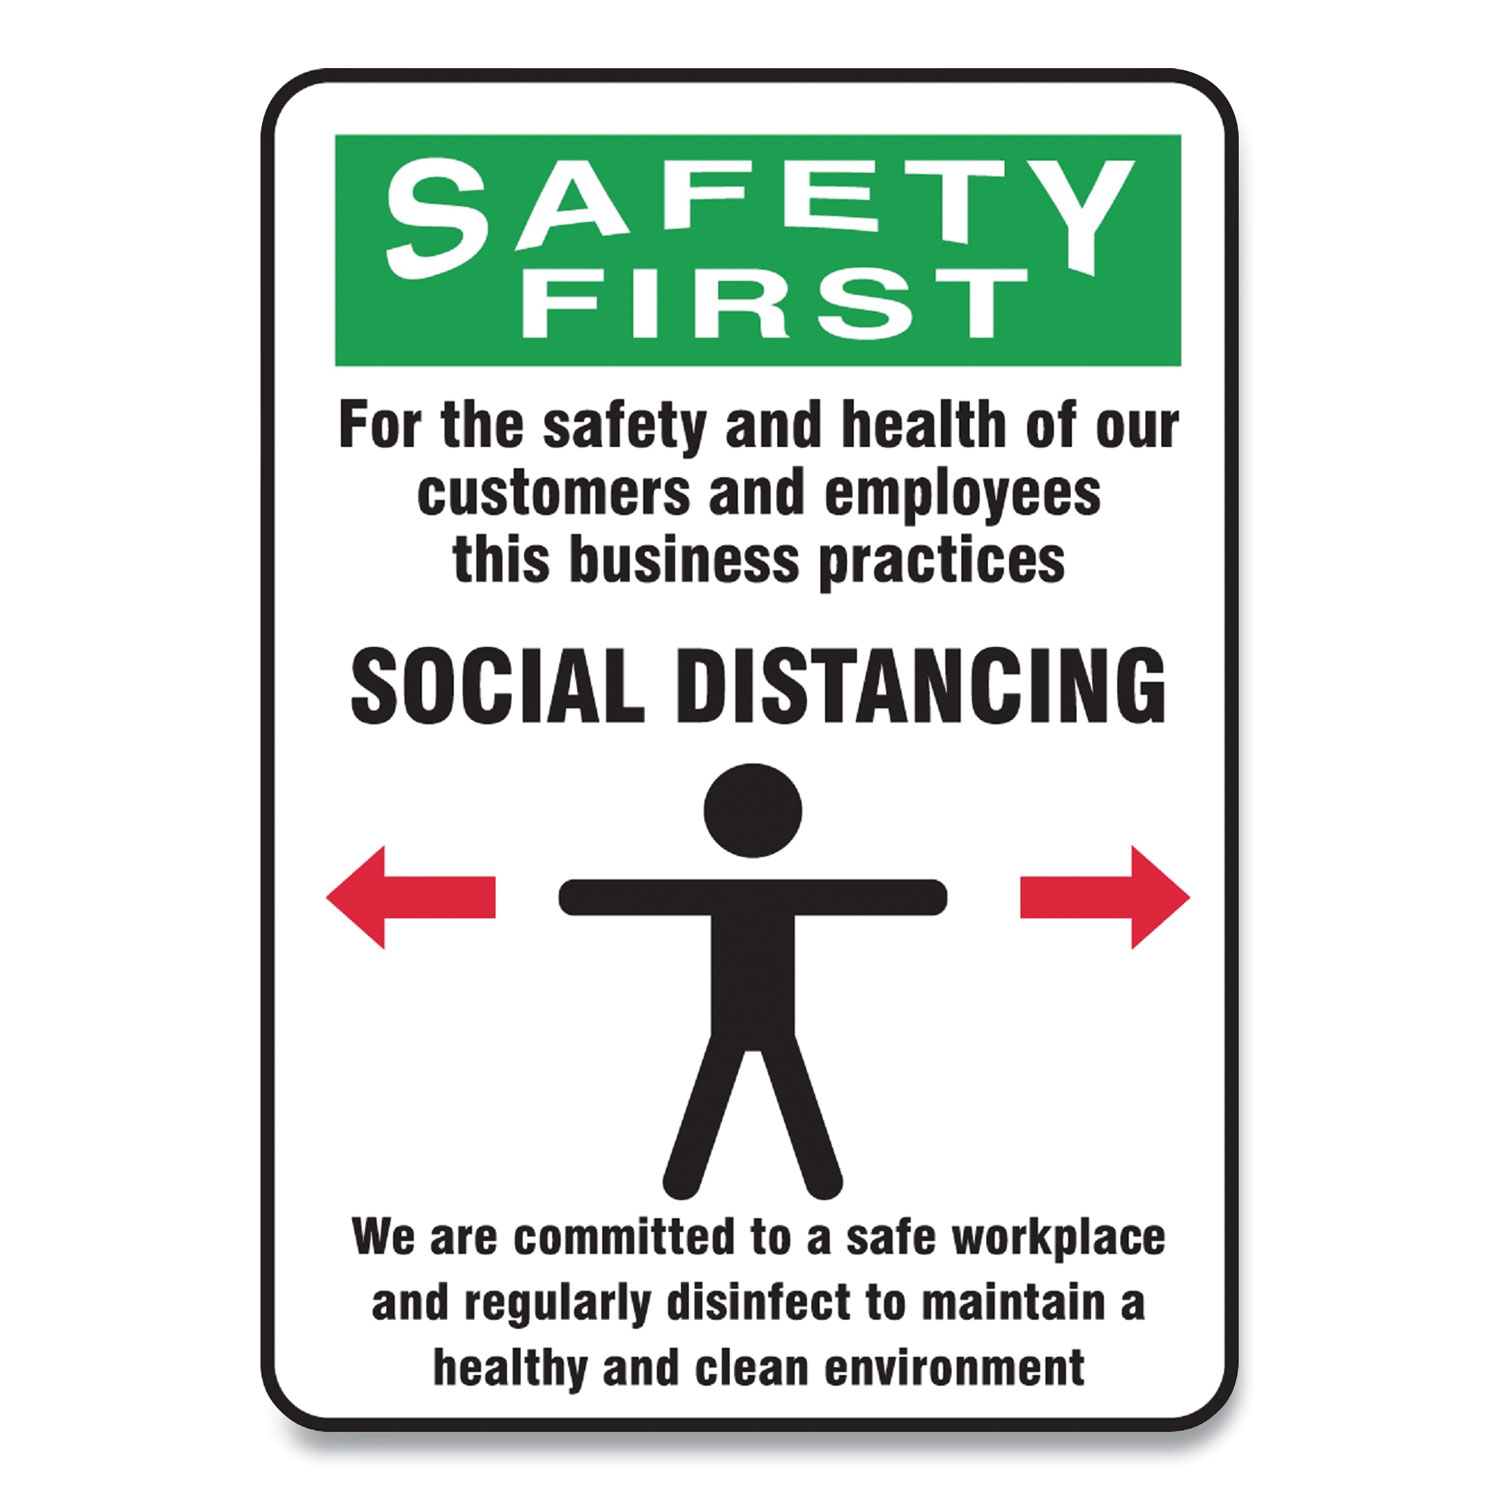 Free Shipping Table Closed "Social Distancing" Plastic Table Tents 15pk White 